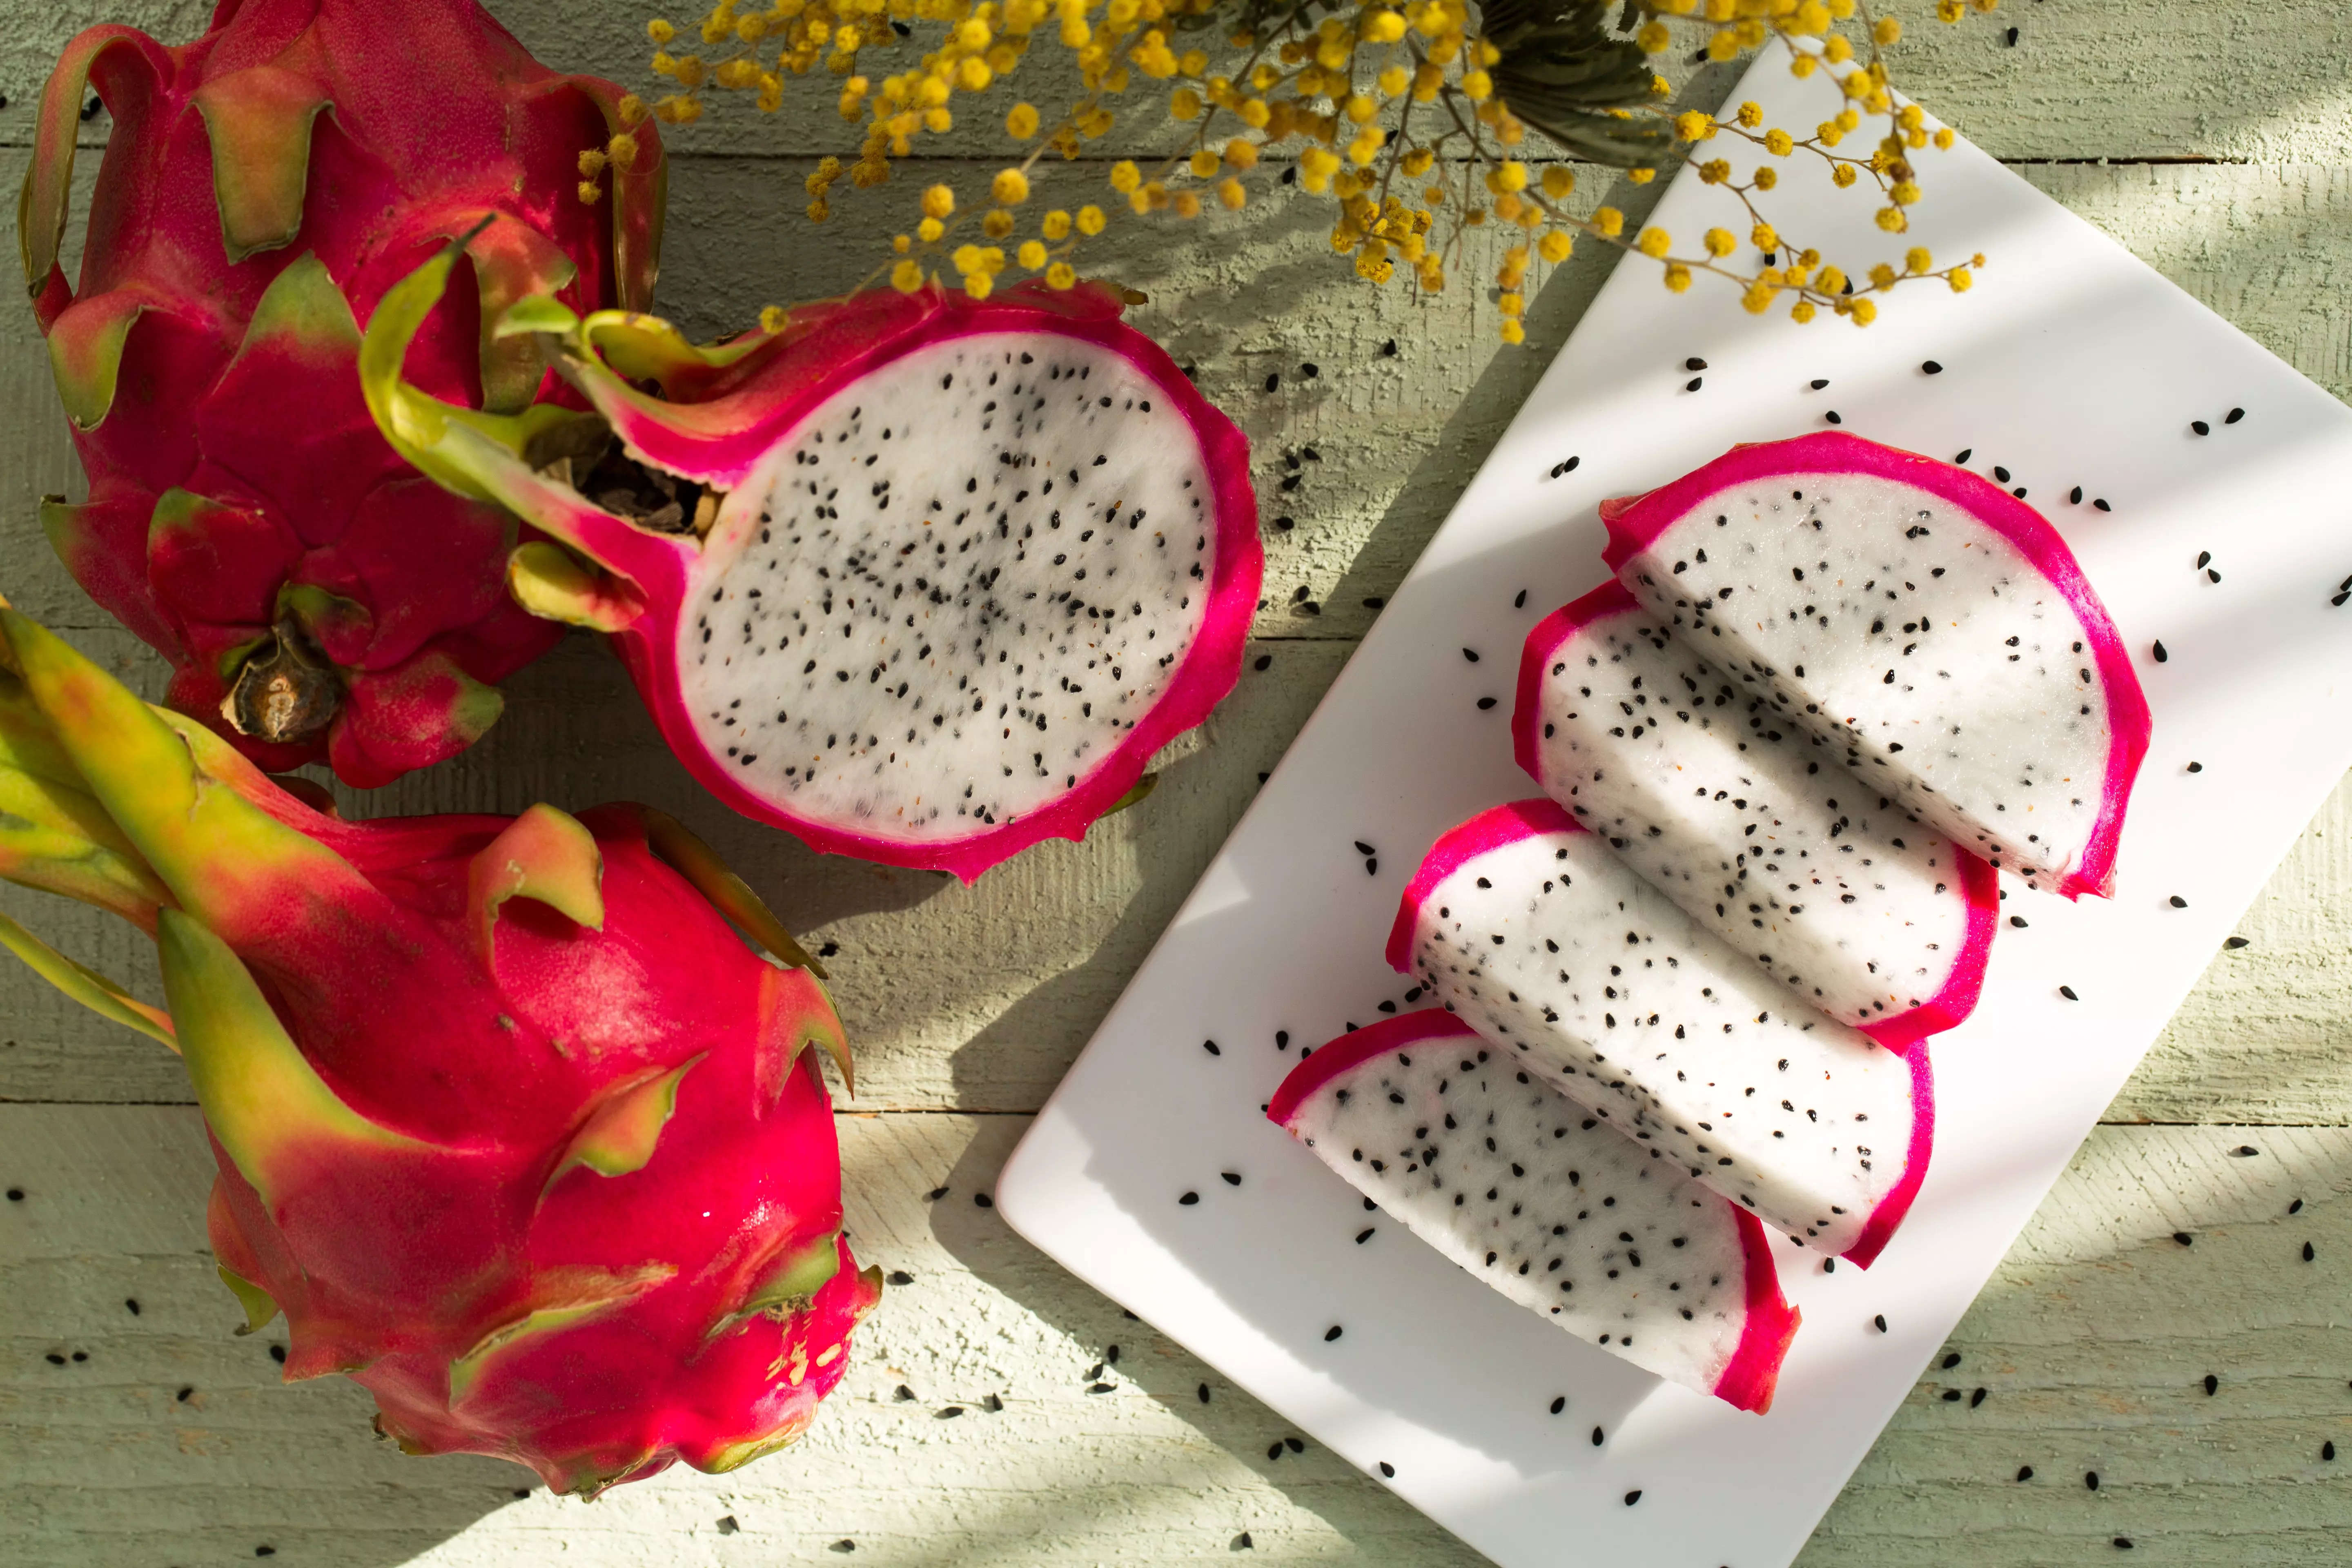 According to nutritionists, dragon fruit can work wonders in inducing weight loss. (Photo credit: Pexels)